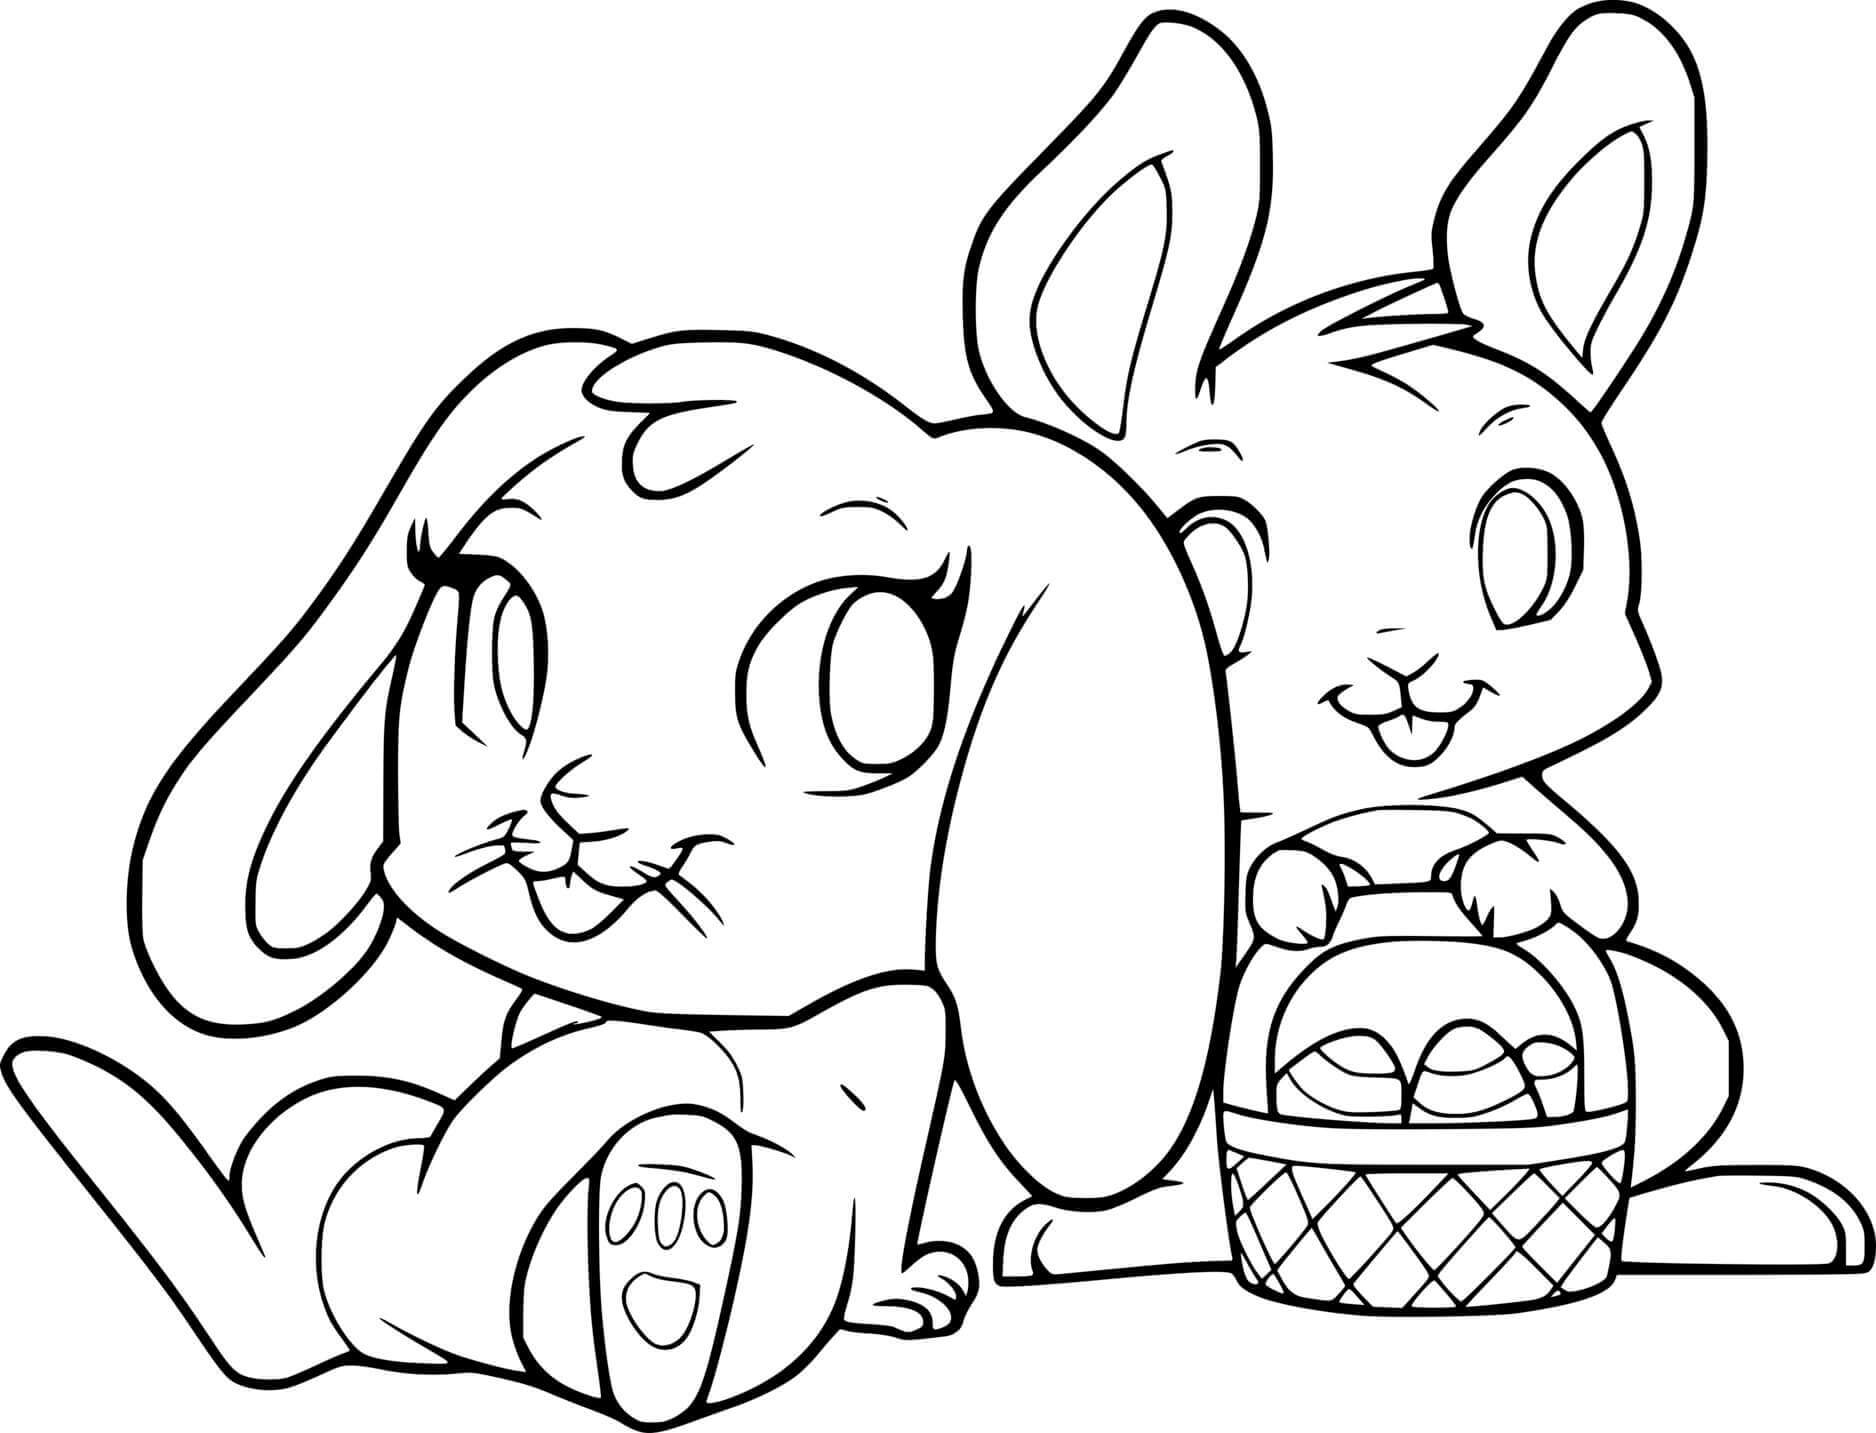 Two Cute Easter Bunnies And A Basket Coloring Page